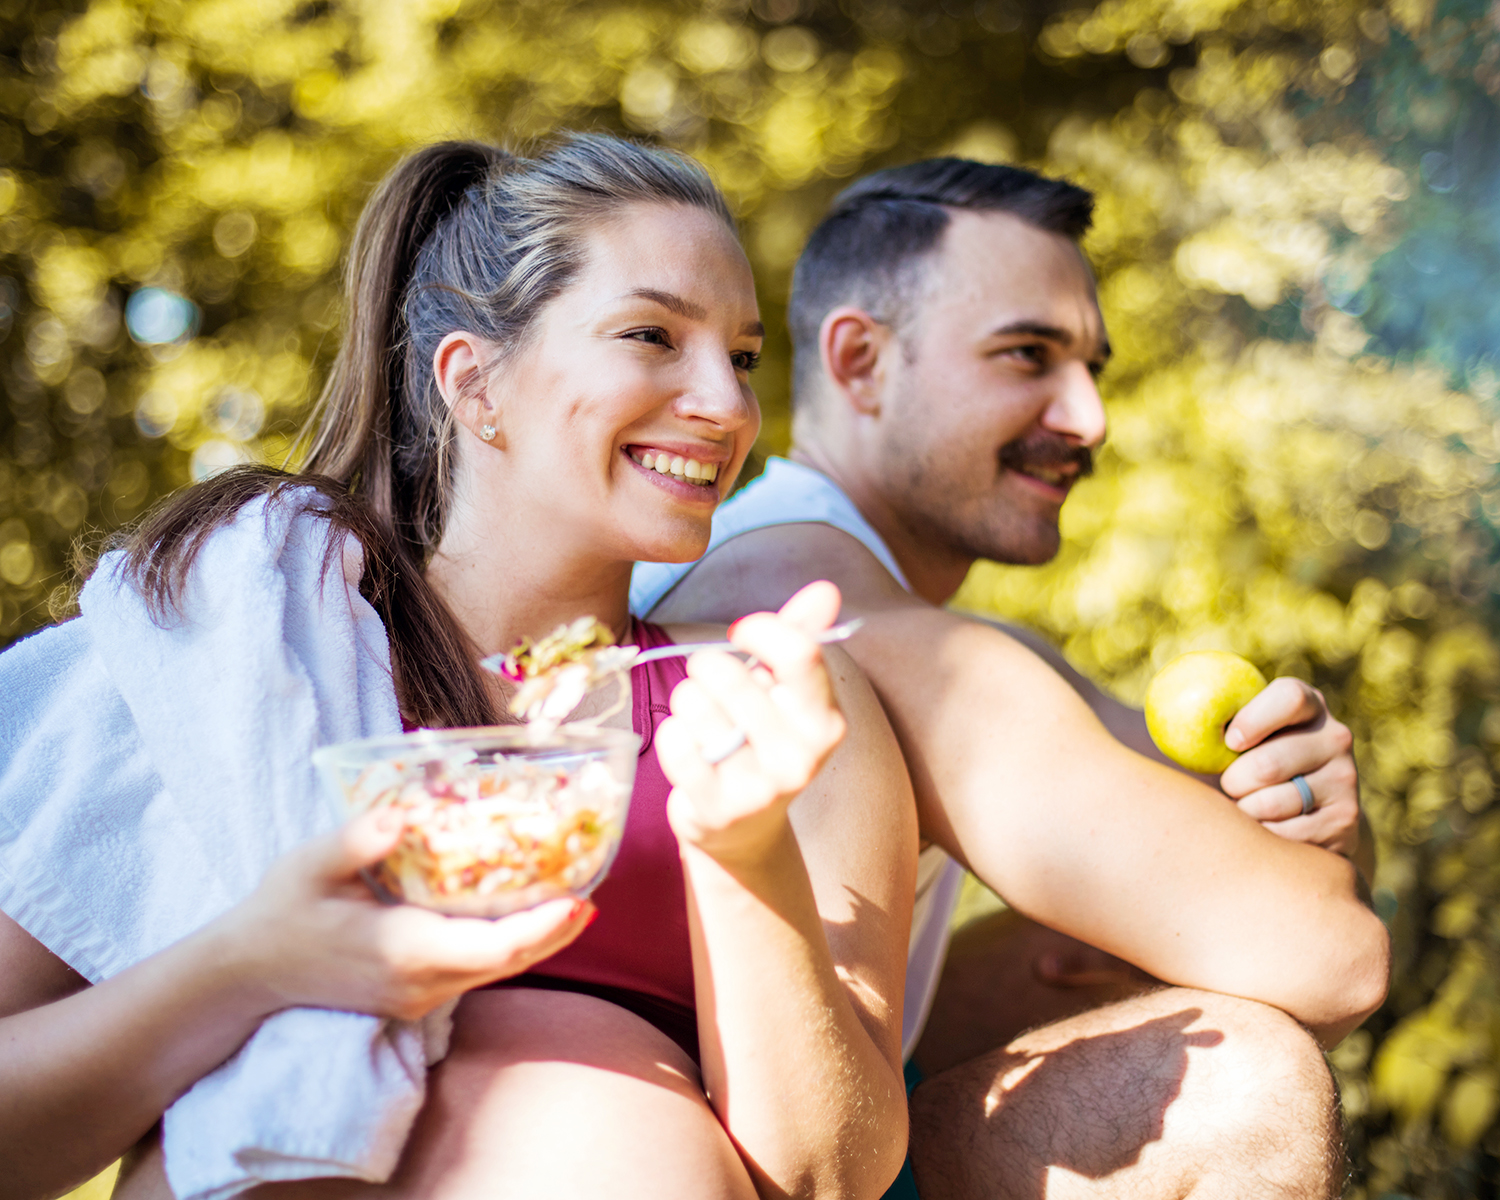 Couple Eating Outdoors with Healthy Food and Diet